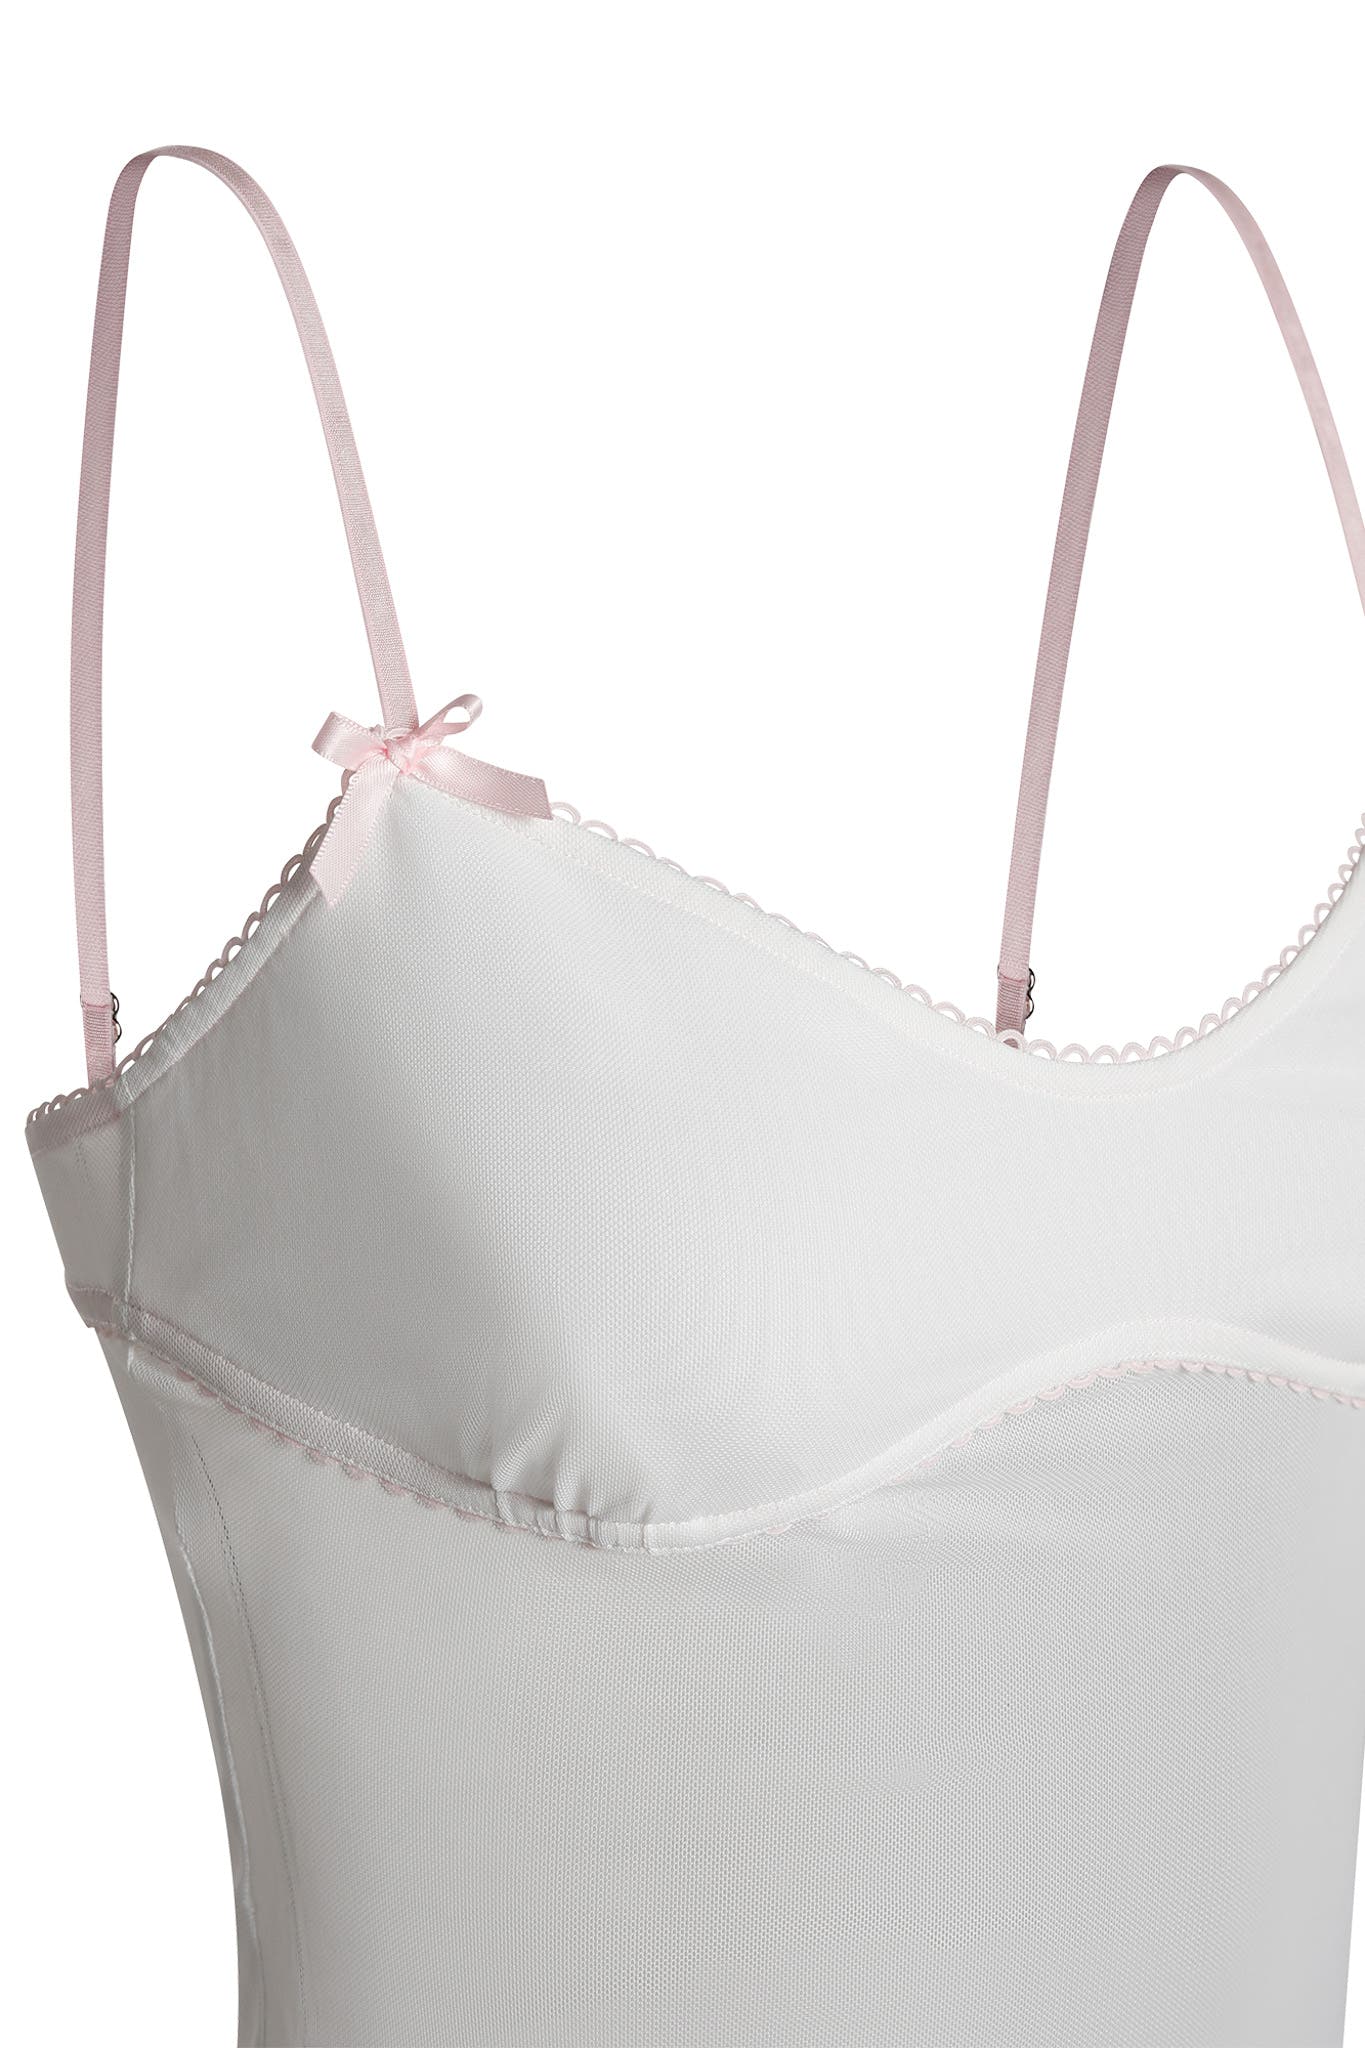 CHERIE TOP - WHITE/PINK